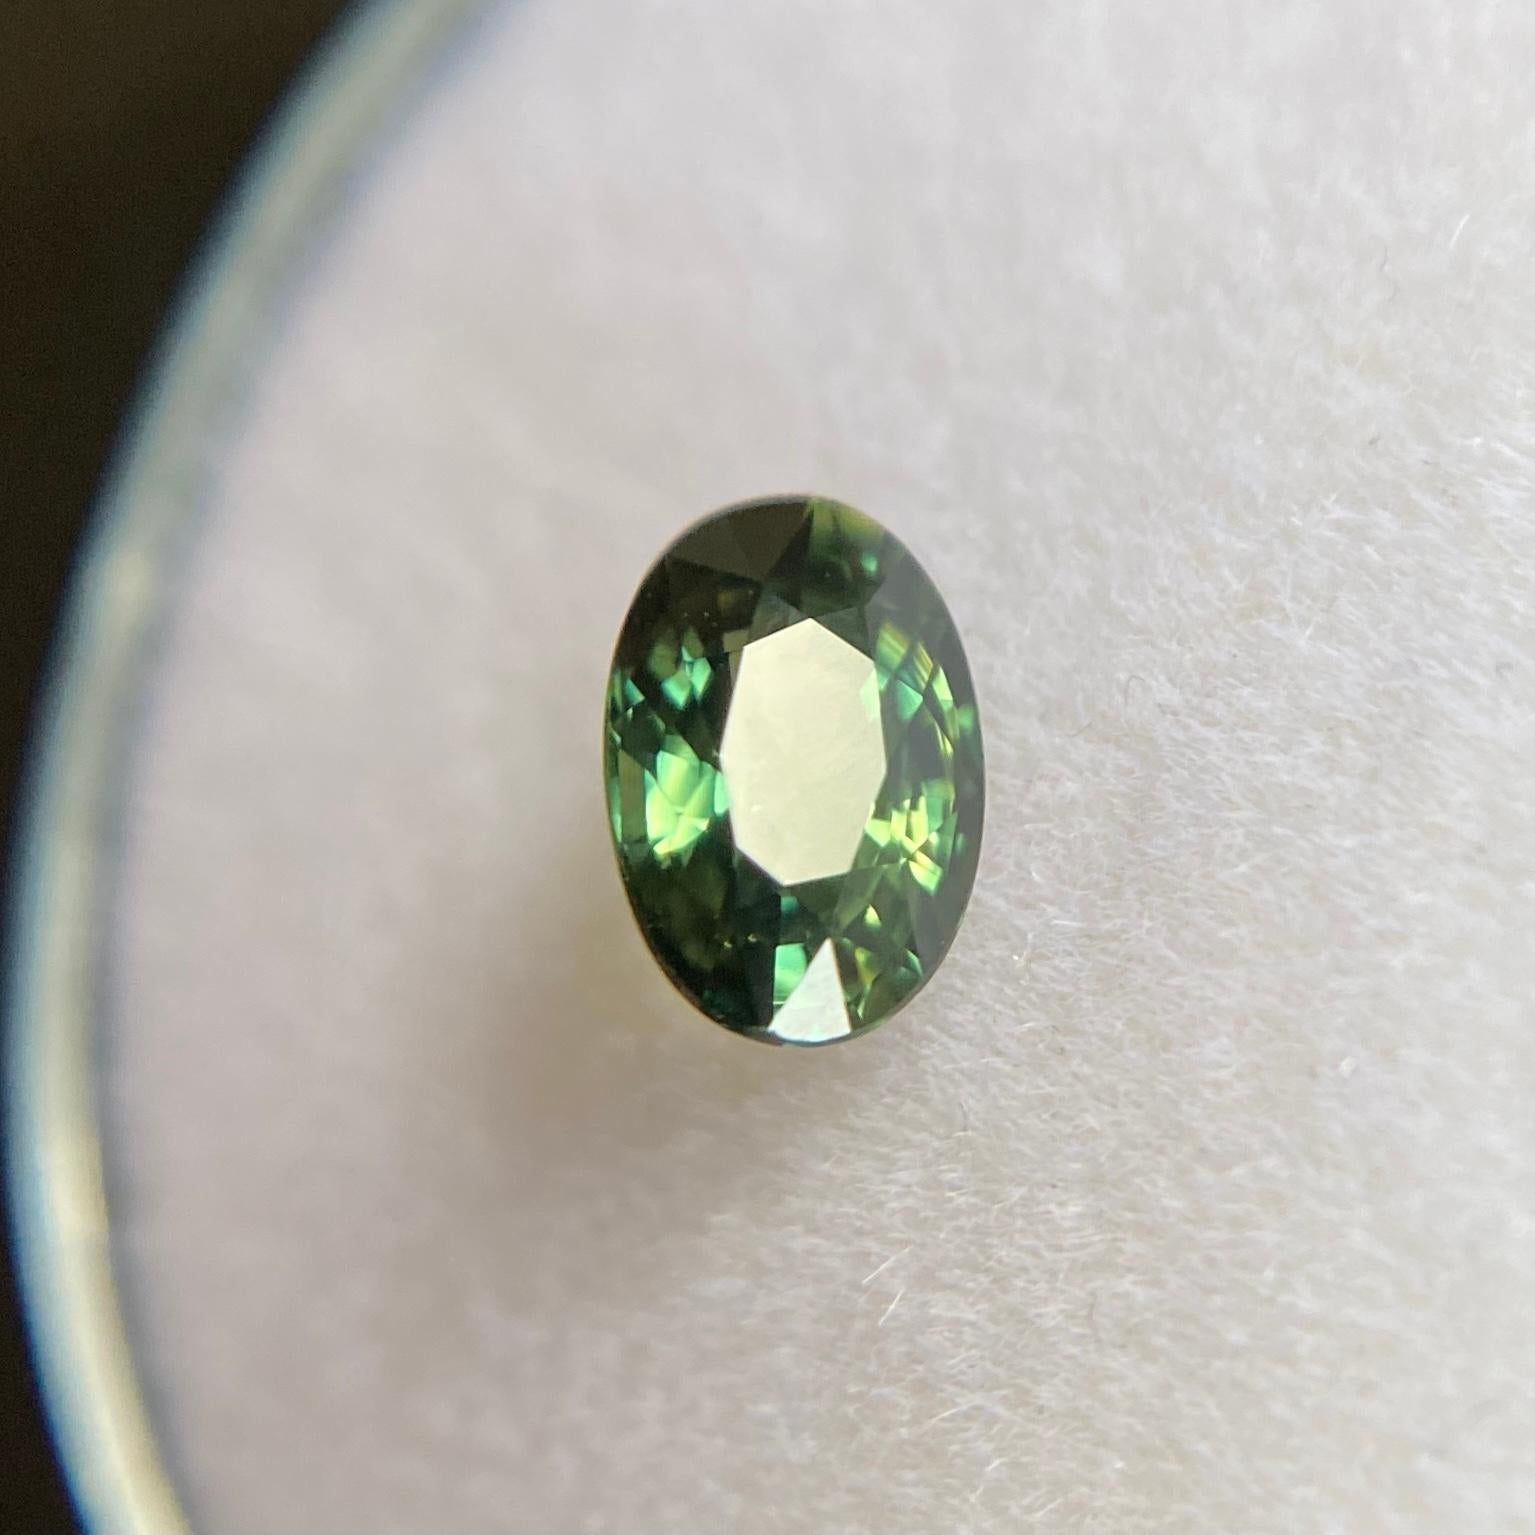 Untreated Greenish Yellow Blue Parti-Colour/Bi colour Australian Sapphire Gemstone.

0.72 Carat with a beautiful and unique greenish yellow blue colour and excellent clarity, a very clean stone.

Also has an excellent oval cut and polish to show